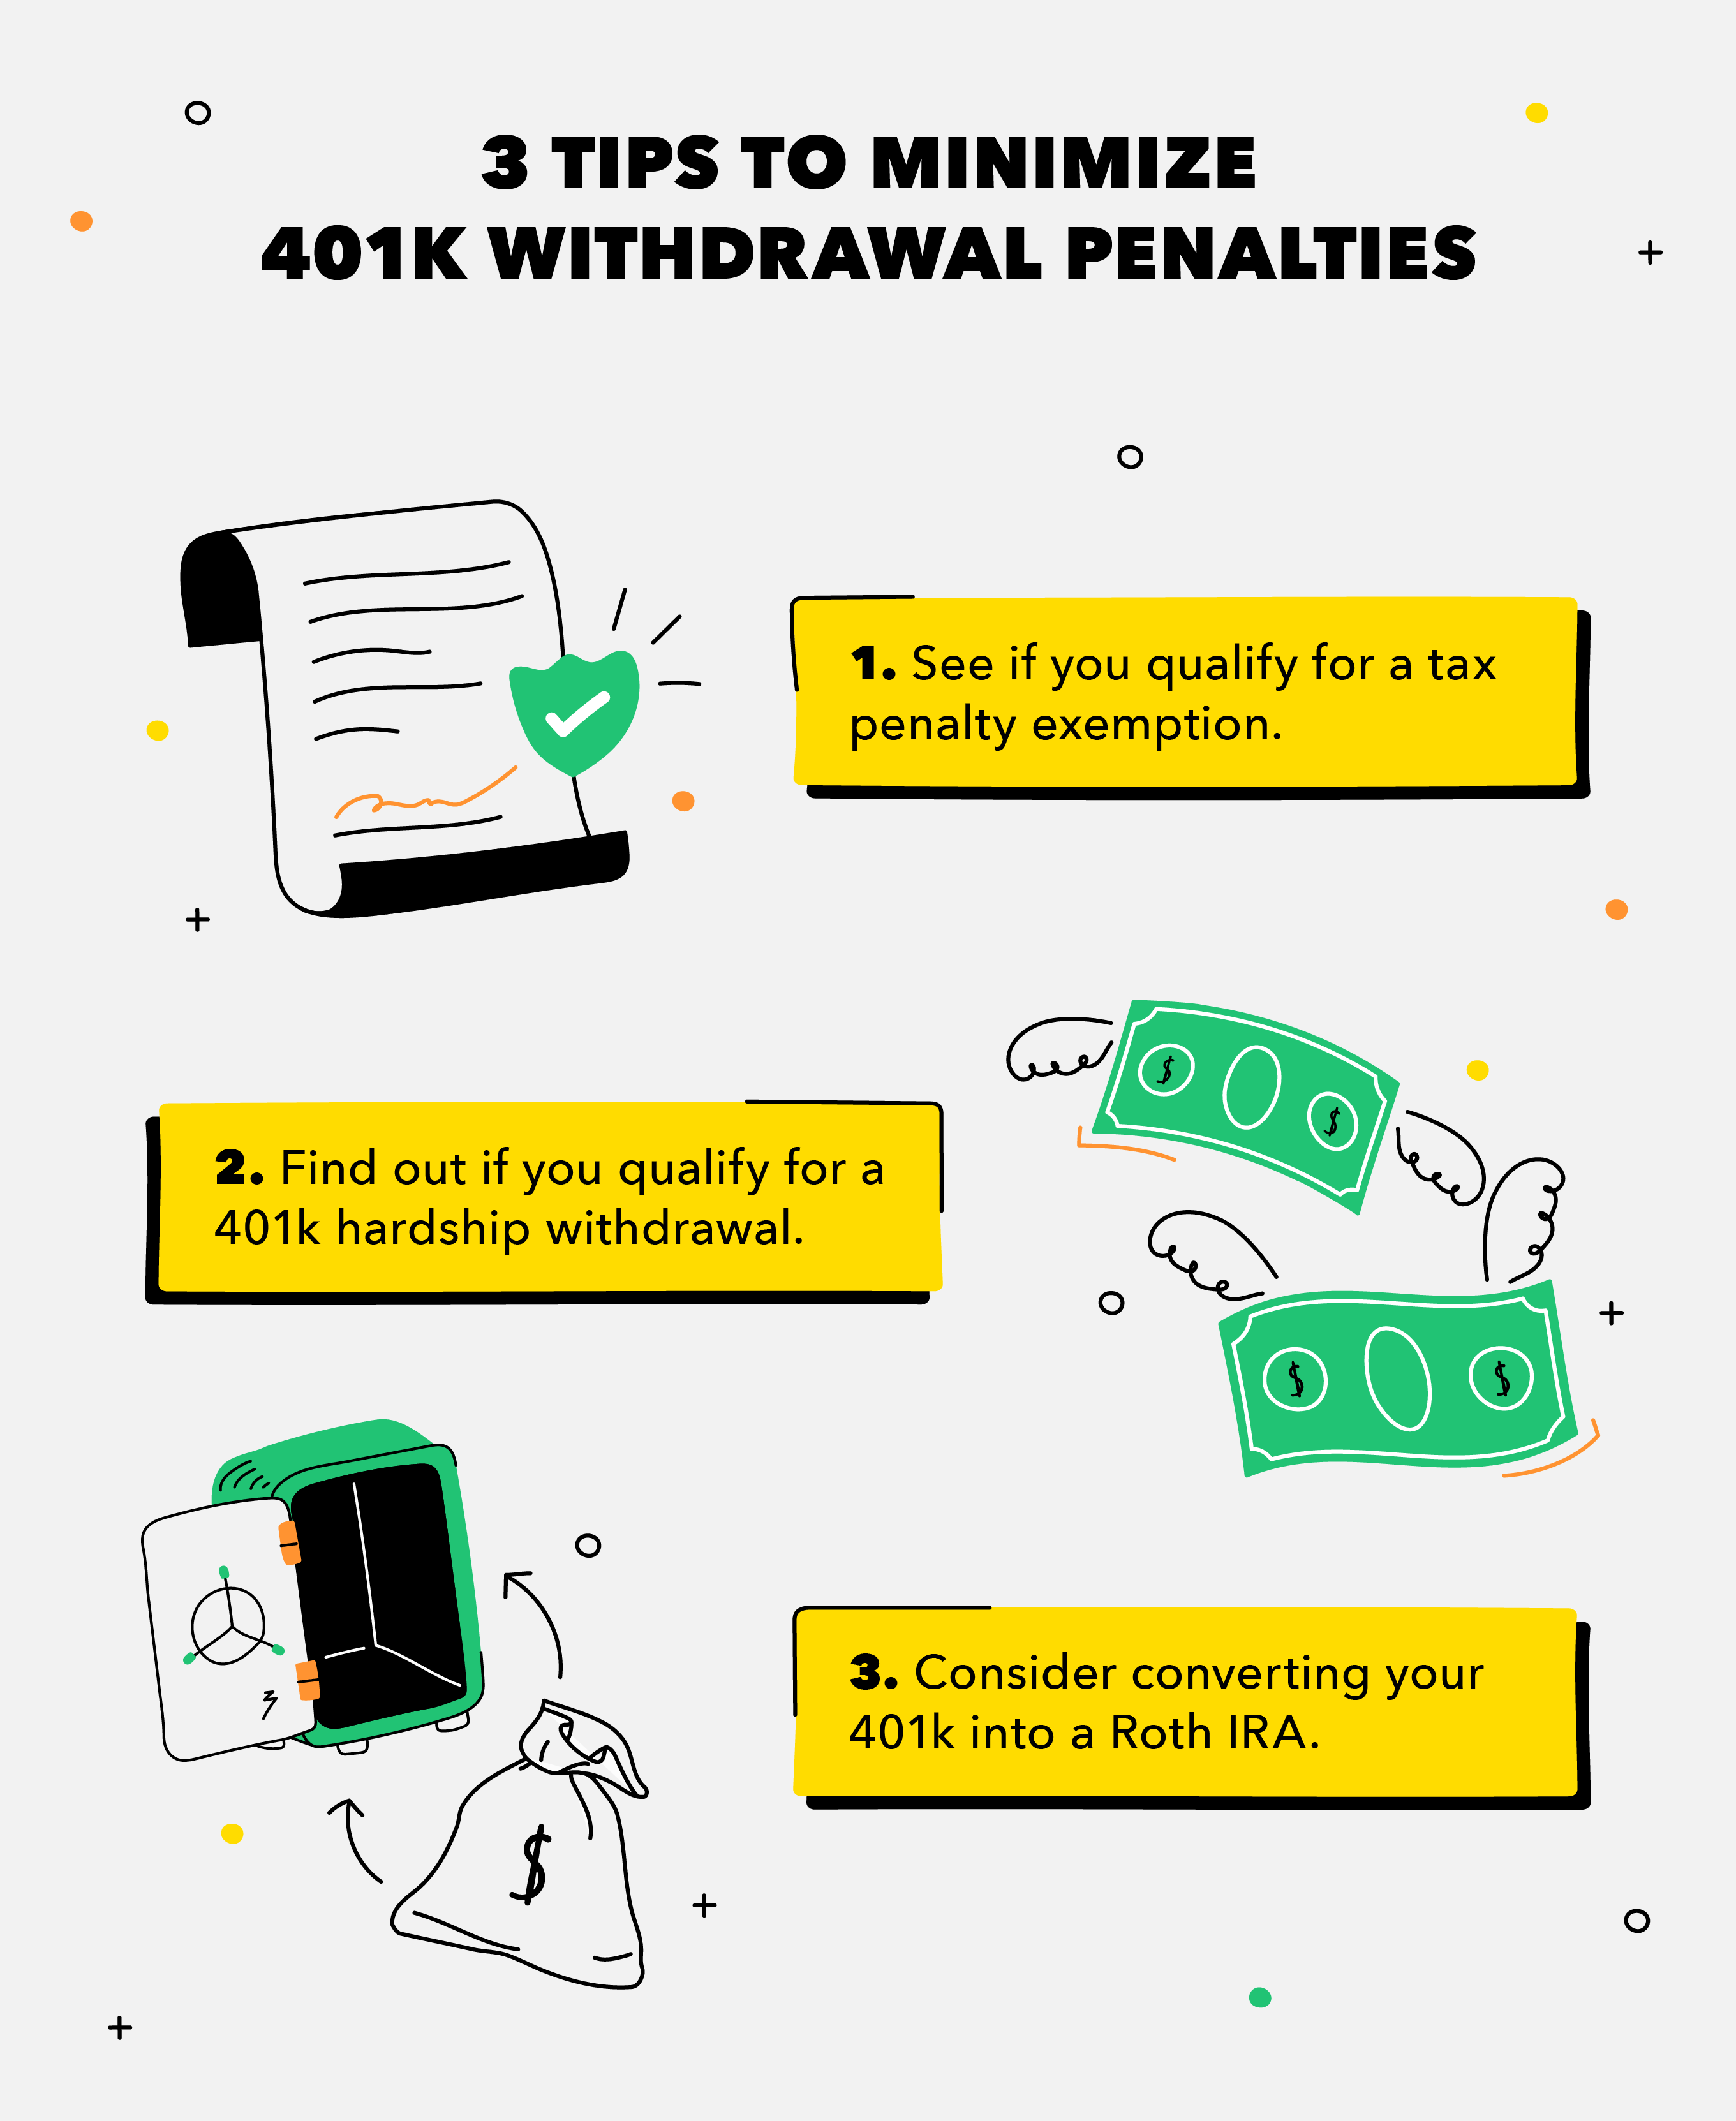 Can You Withdraw Money From 401k Without Penalty During Covid